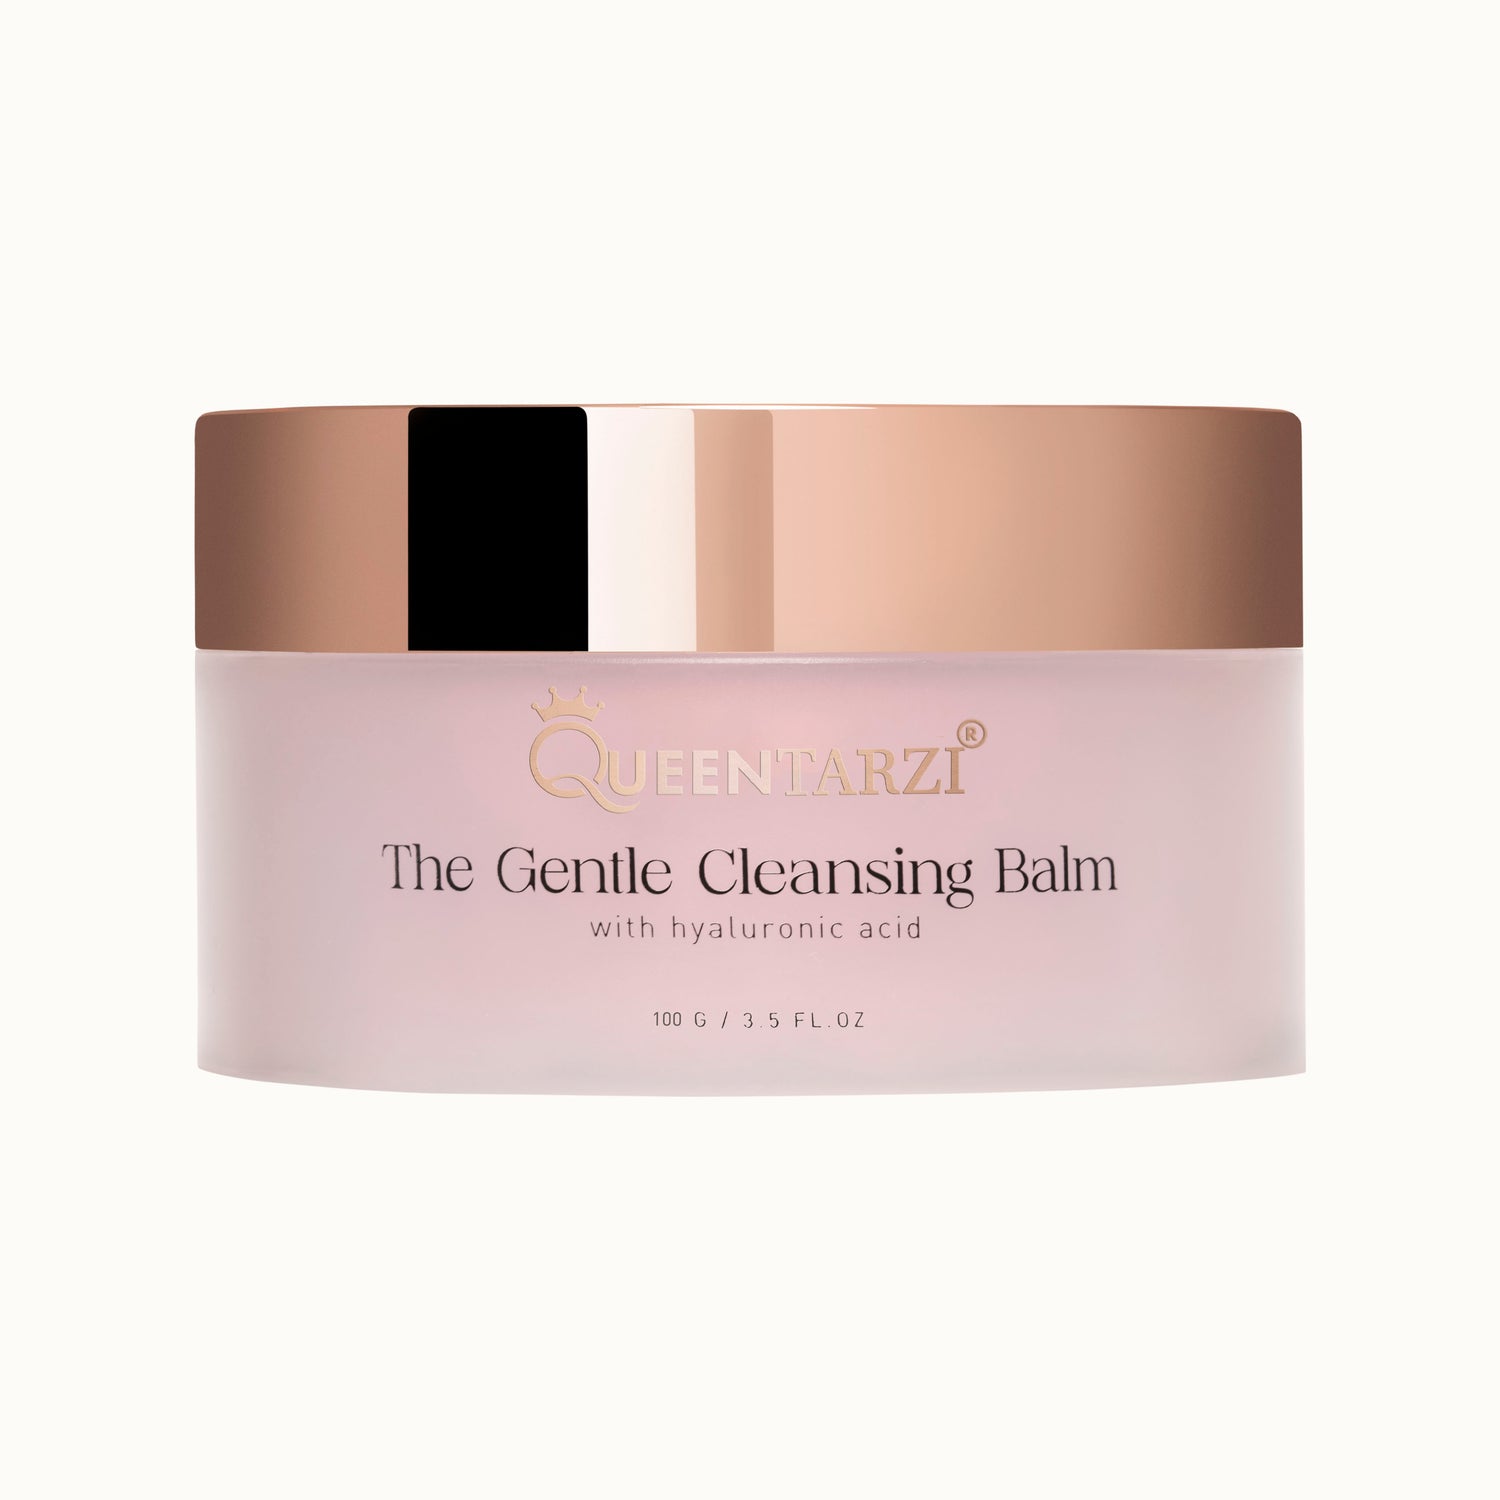 The Gentle Cleansing Balm